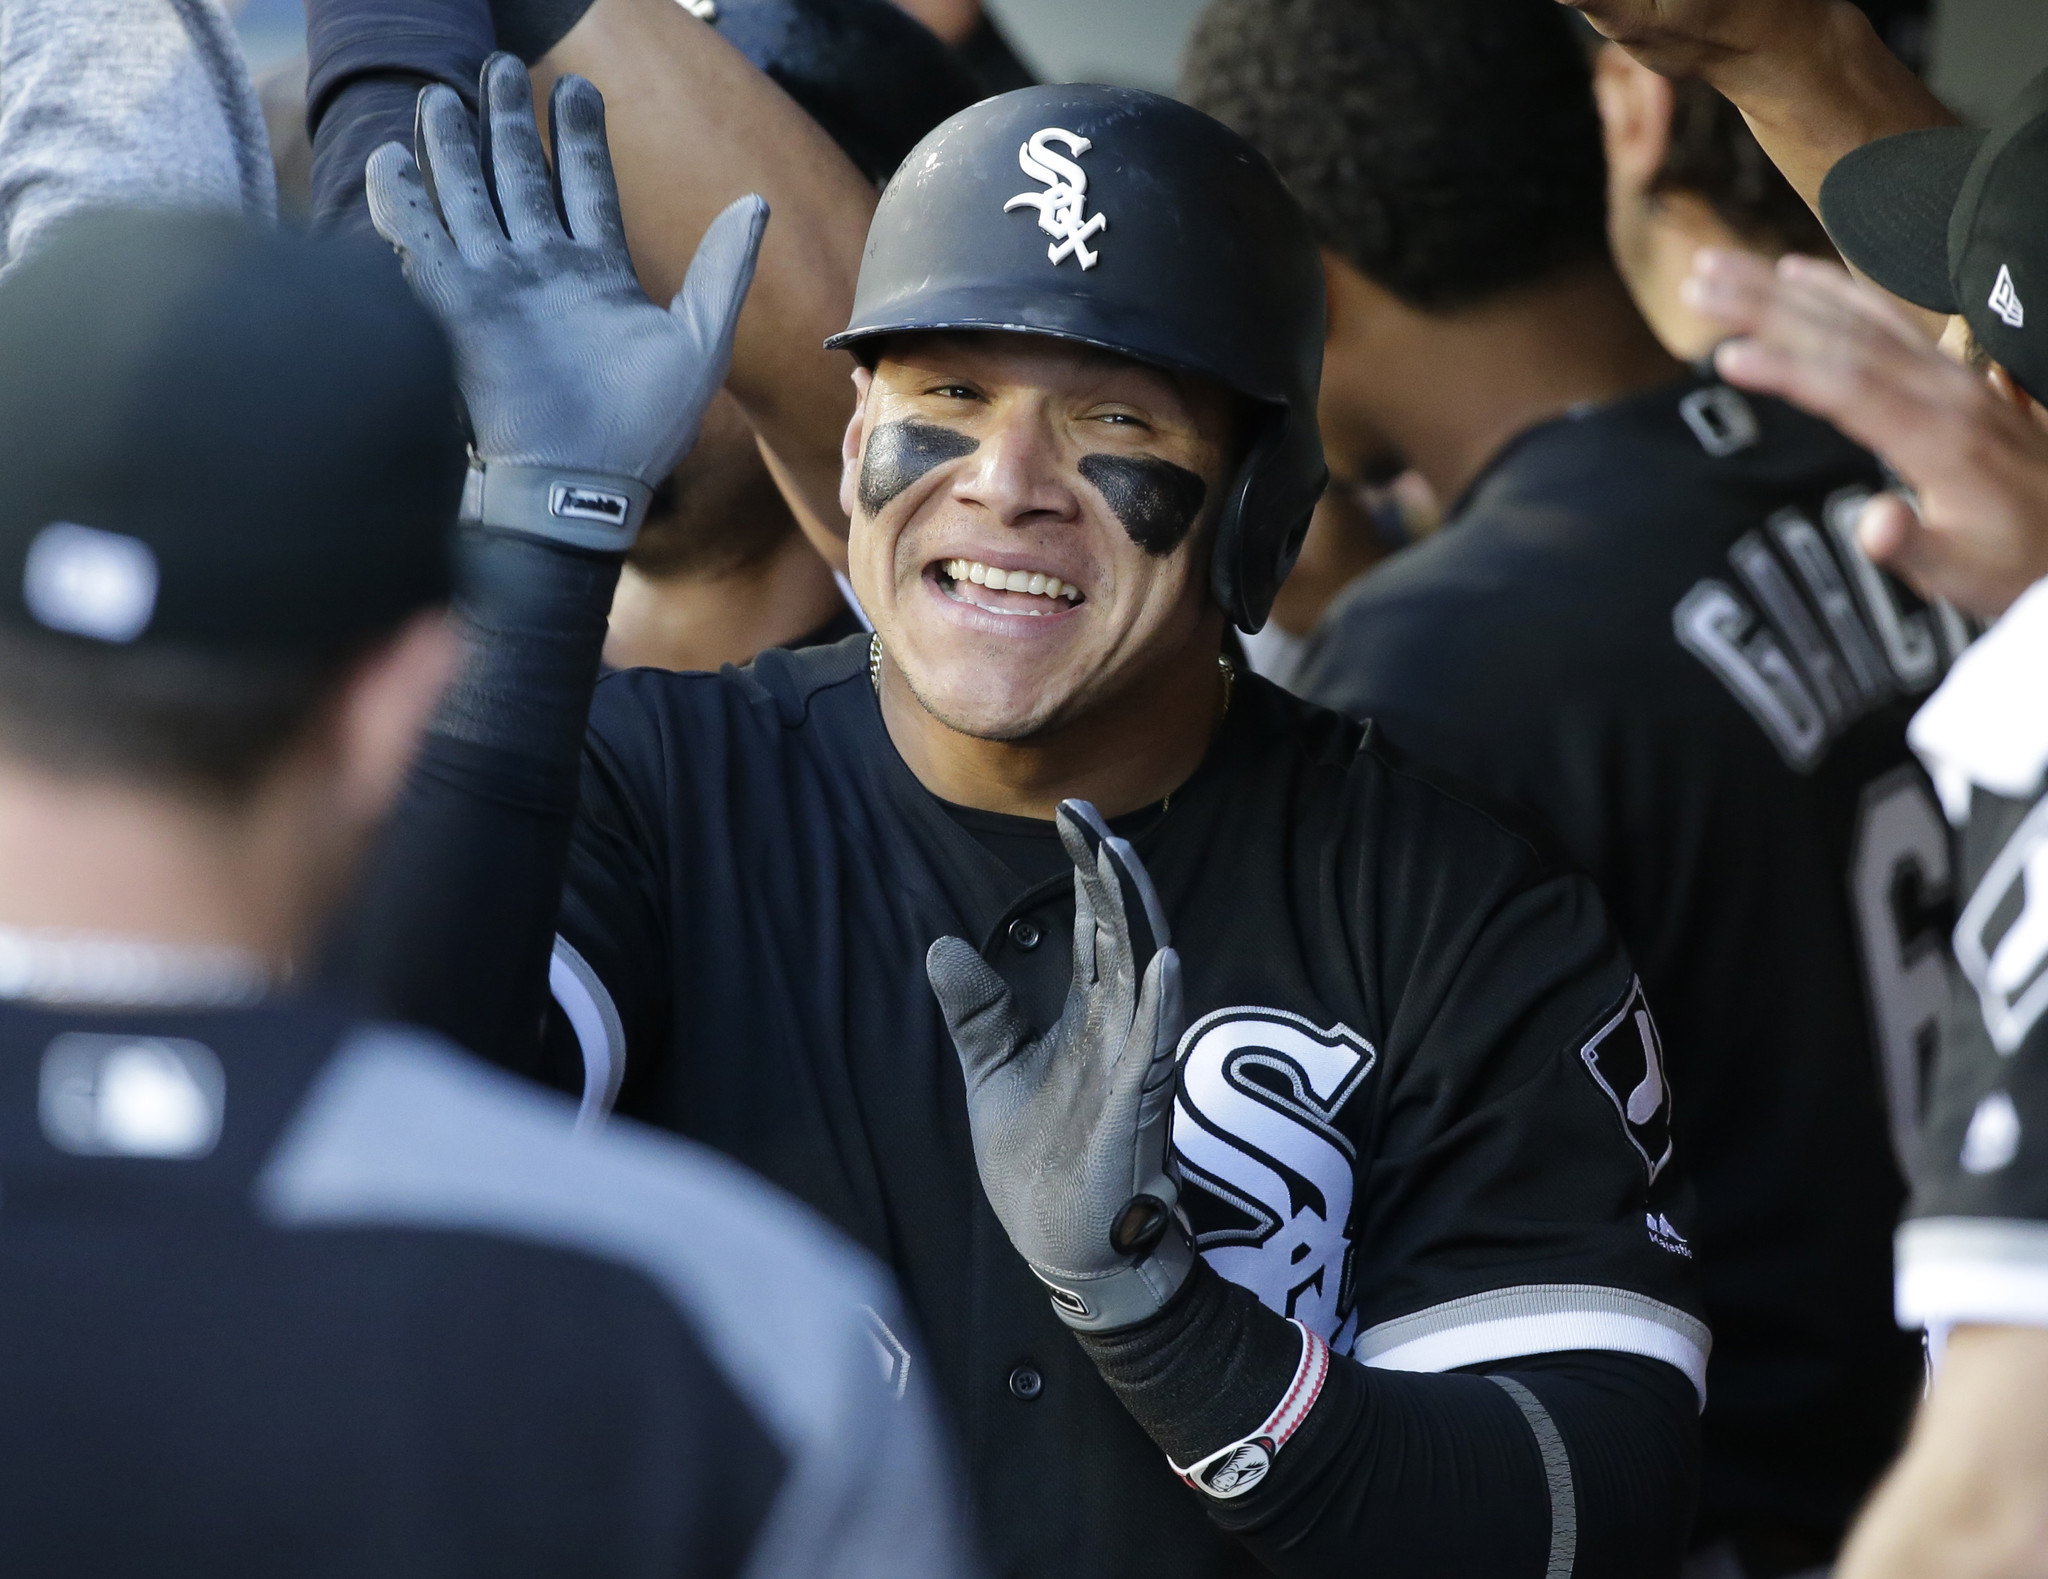 White Sox hope Avisail Garcia is turning a corner: 'Hopefully this is the beginning'